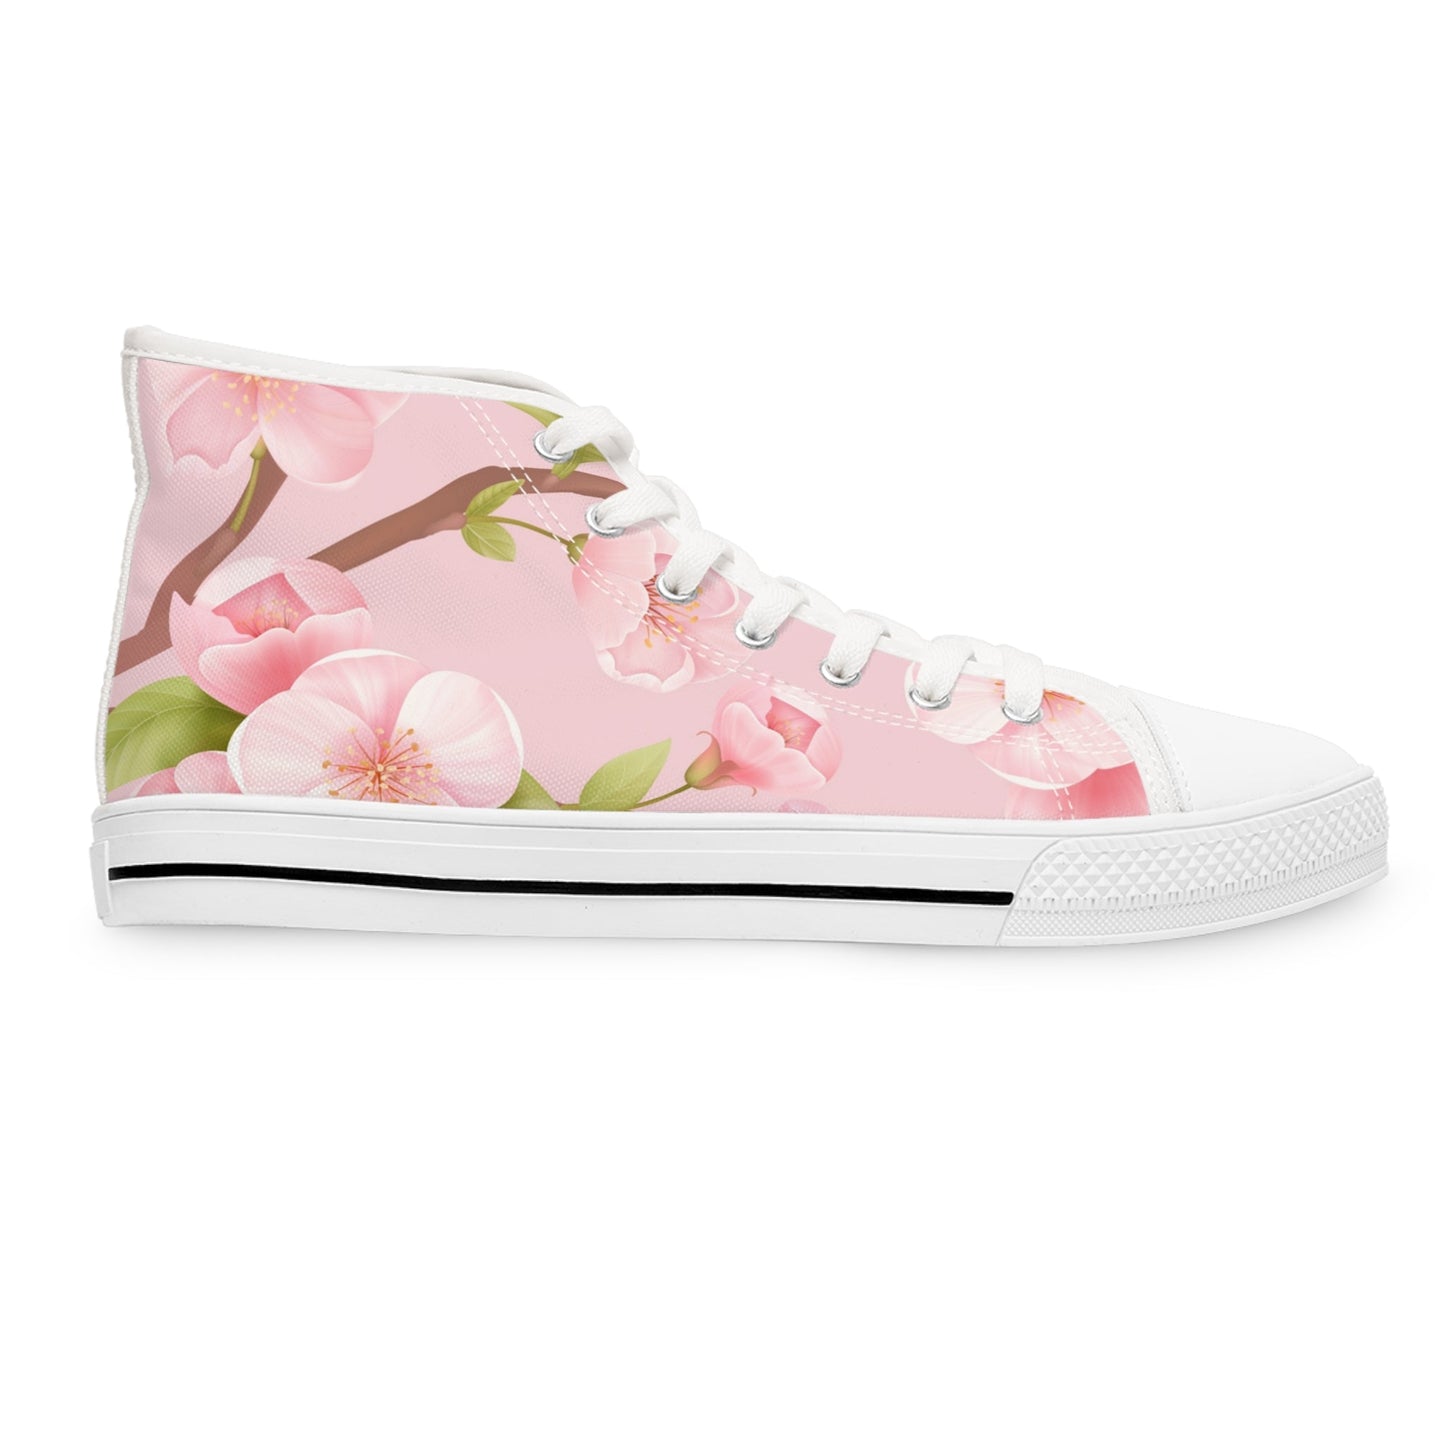 Shoes - Very Blossom Women's High Top Sneakers